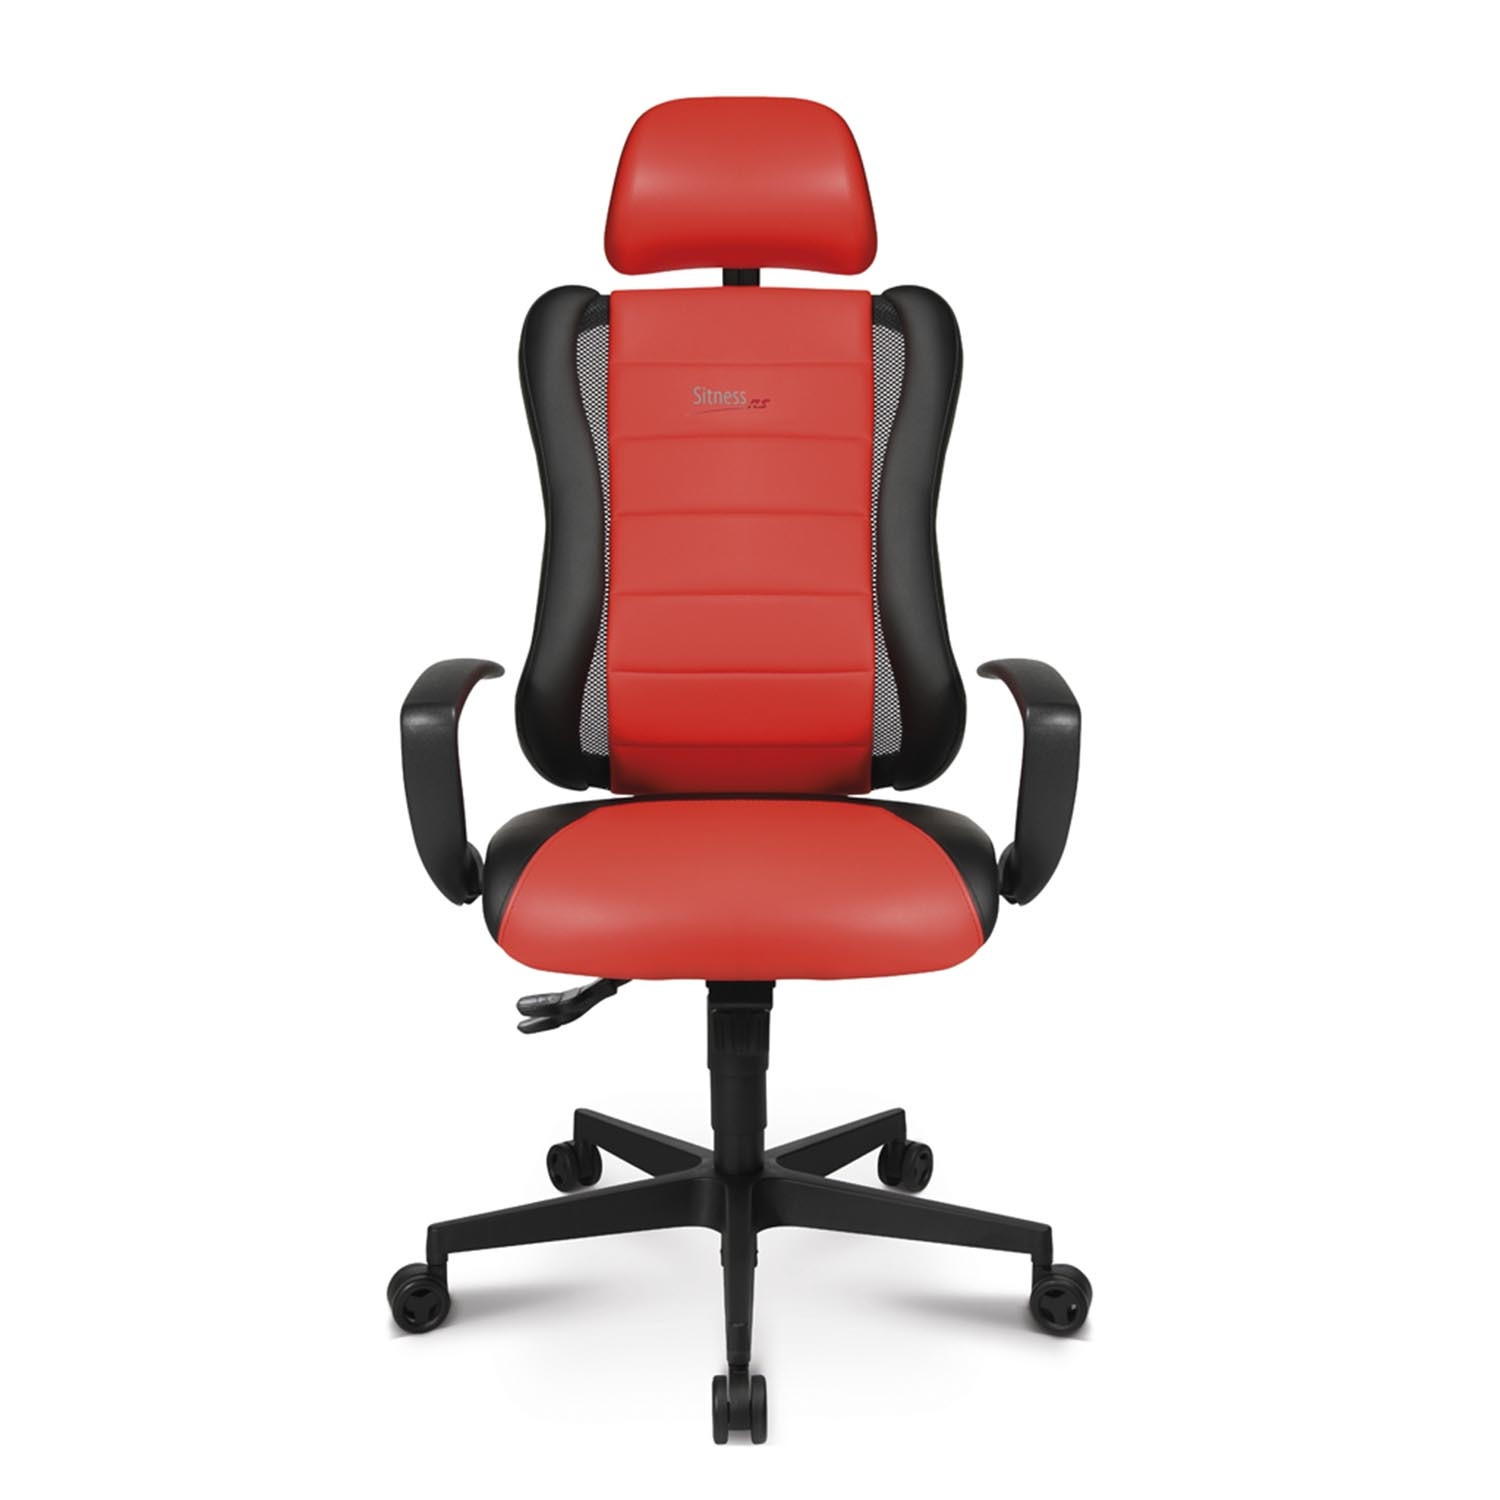 Sitness Racer Chair In Red